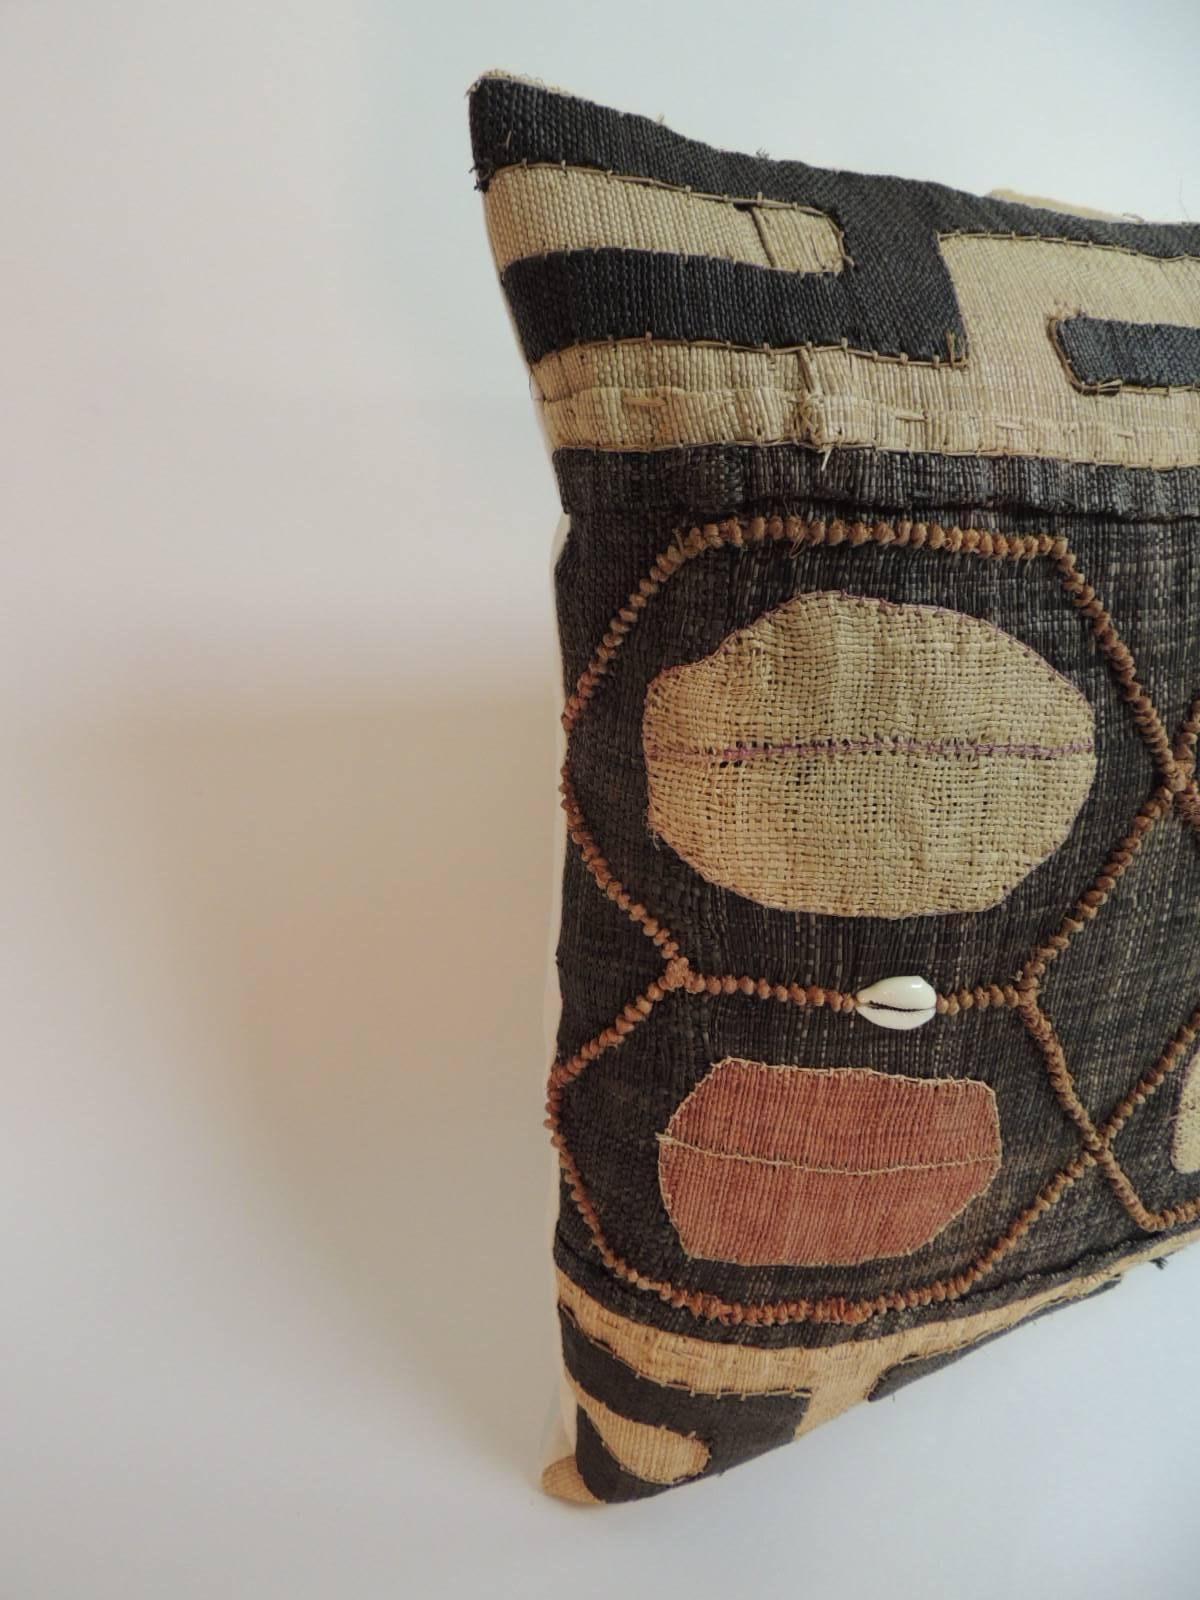 Congolese Pair of Vintage Embroidery African Tribal Lumbar Pillows with Cowries Shells